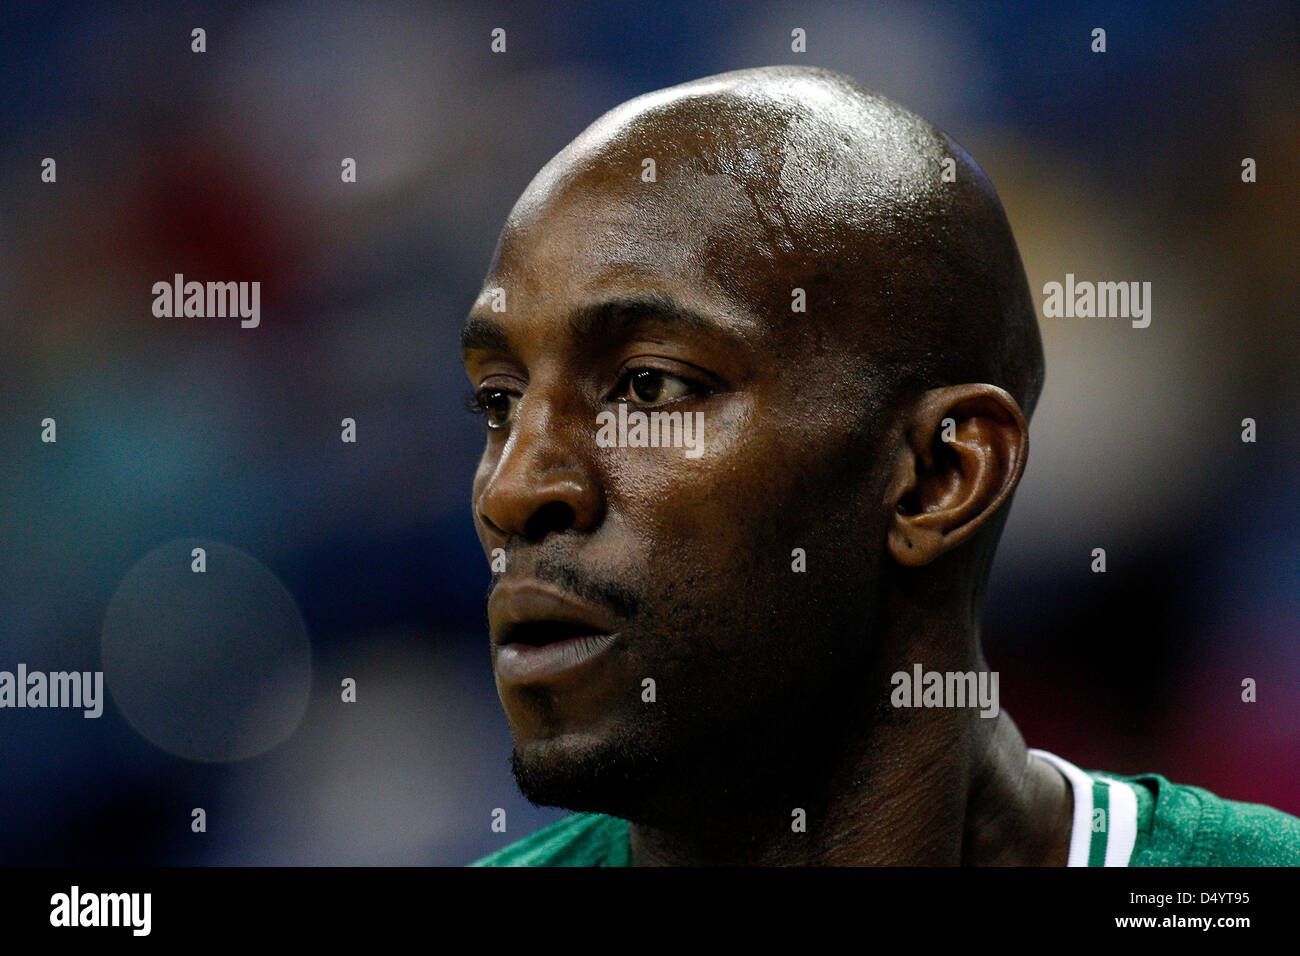 March 20, 2013 - New Orleans, Louisiana, United States of America - March 20, 2013: Boston Celtics center Kevin Garnett (5) during the NBA basketball game between the New Orleans Hornets and the Boston Celtics at the New Orleans Arena in New Orleans, LA. Stock Photo